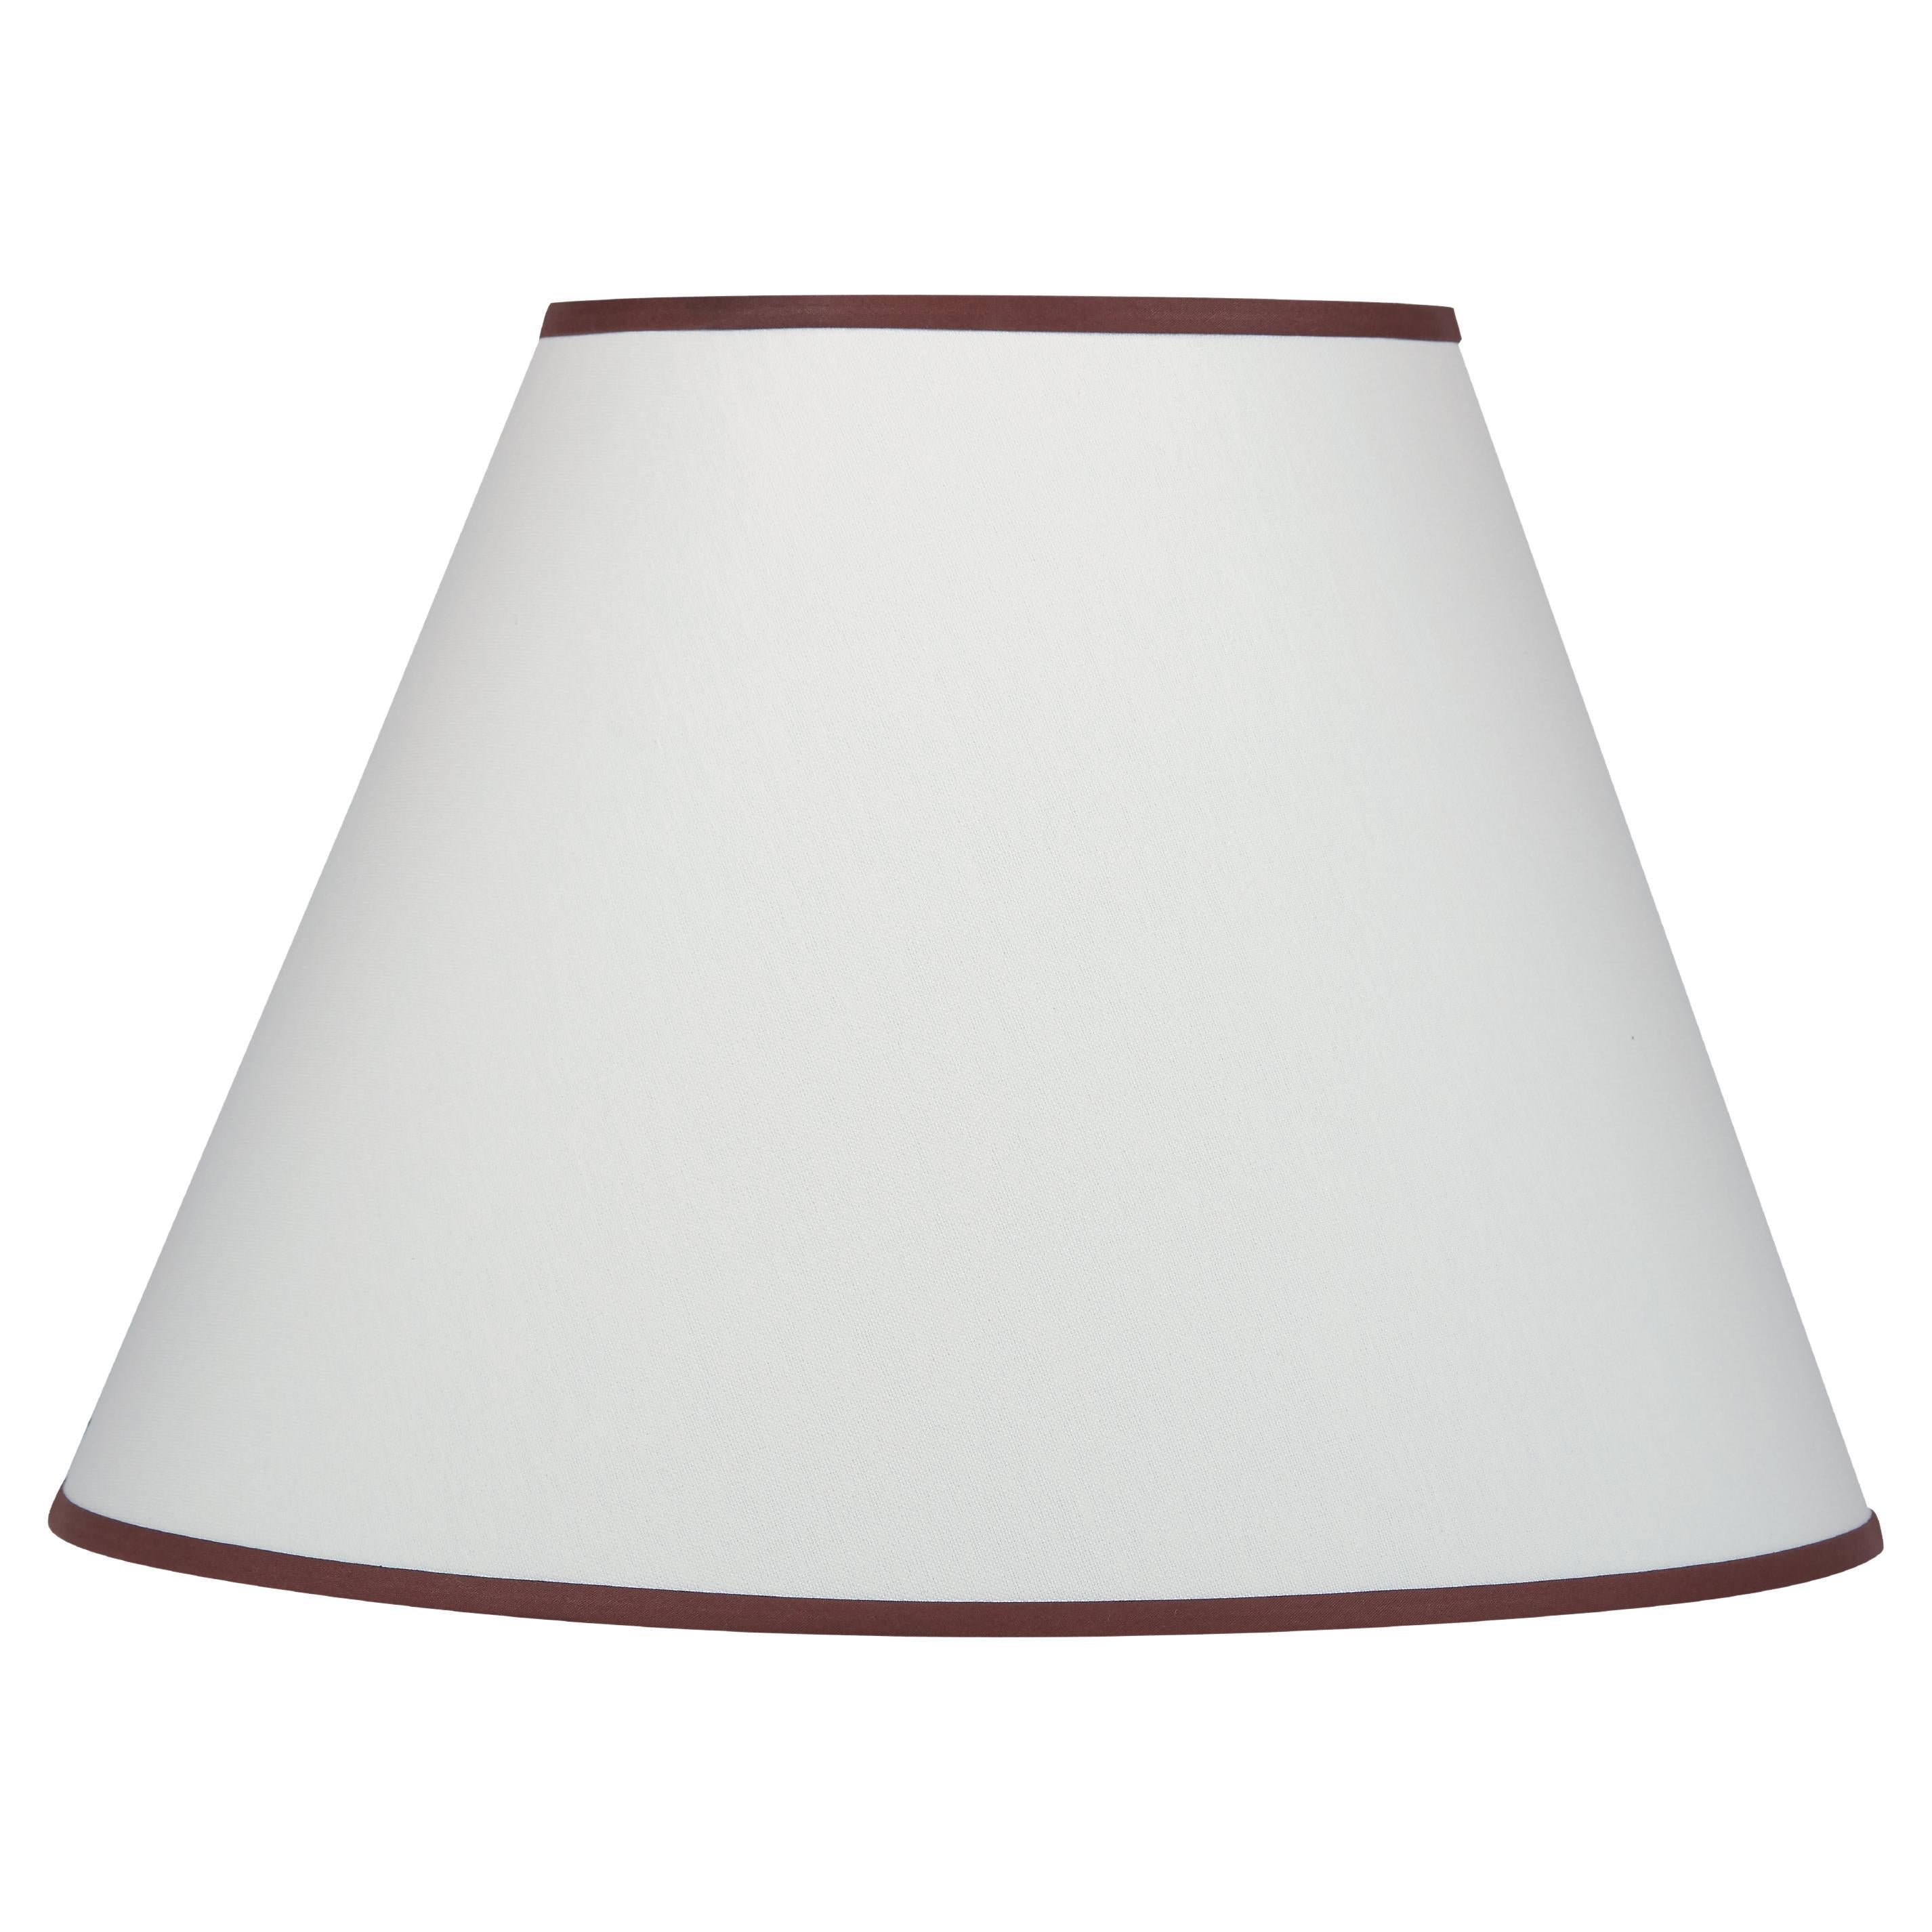 Bunny Williams Home Banda Lampshade (Brown) For Sale